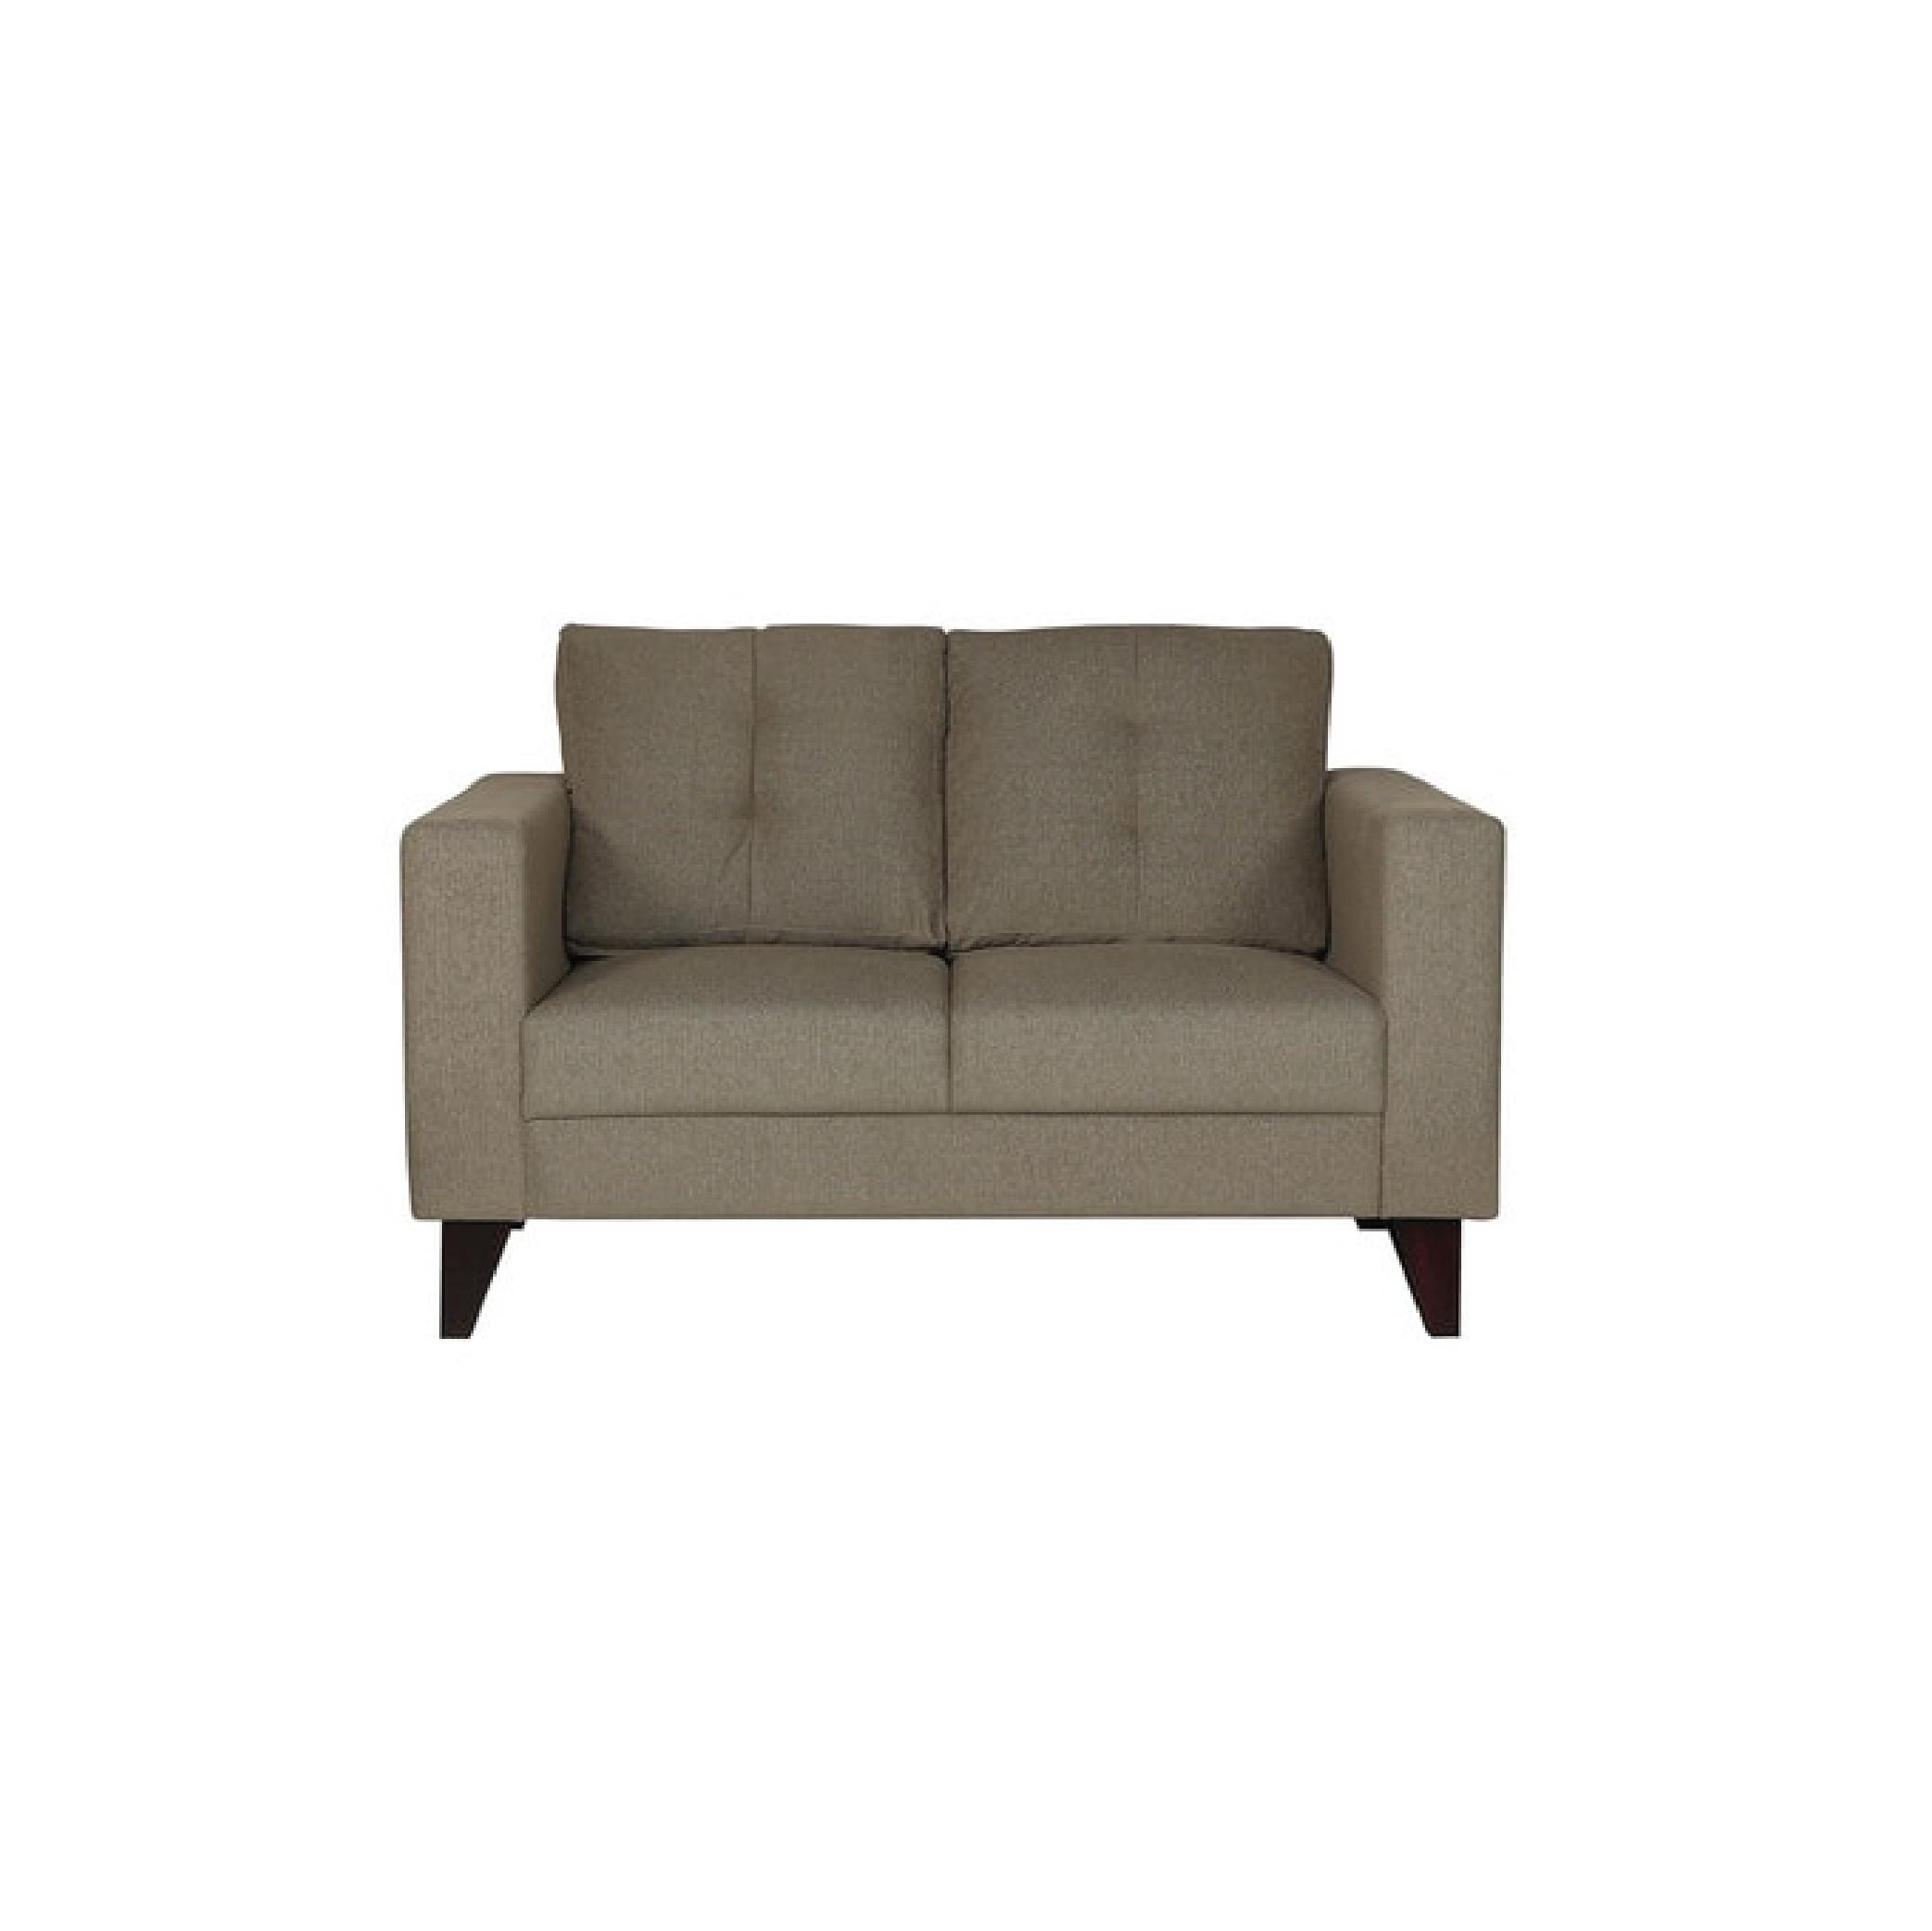 Inferio Two Seater Sofa in Sandy Brown Colour